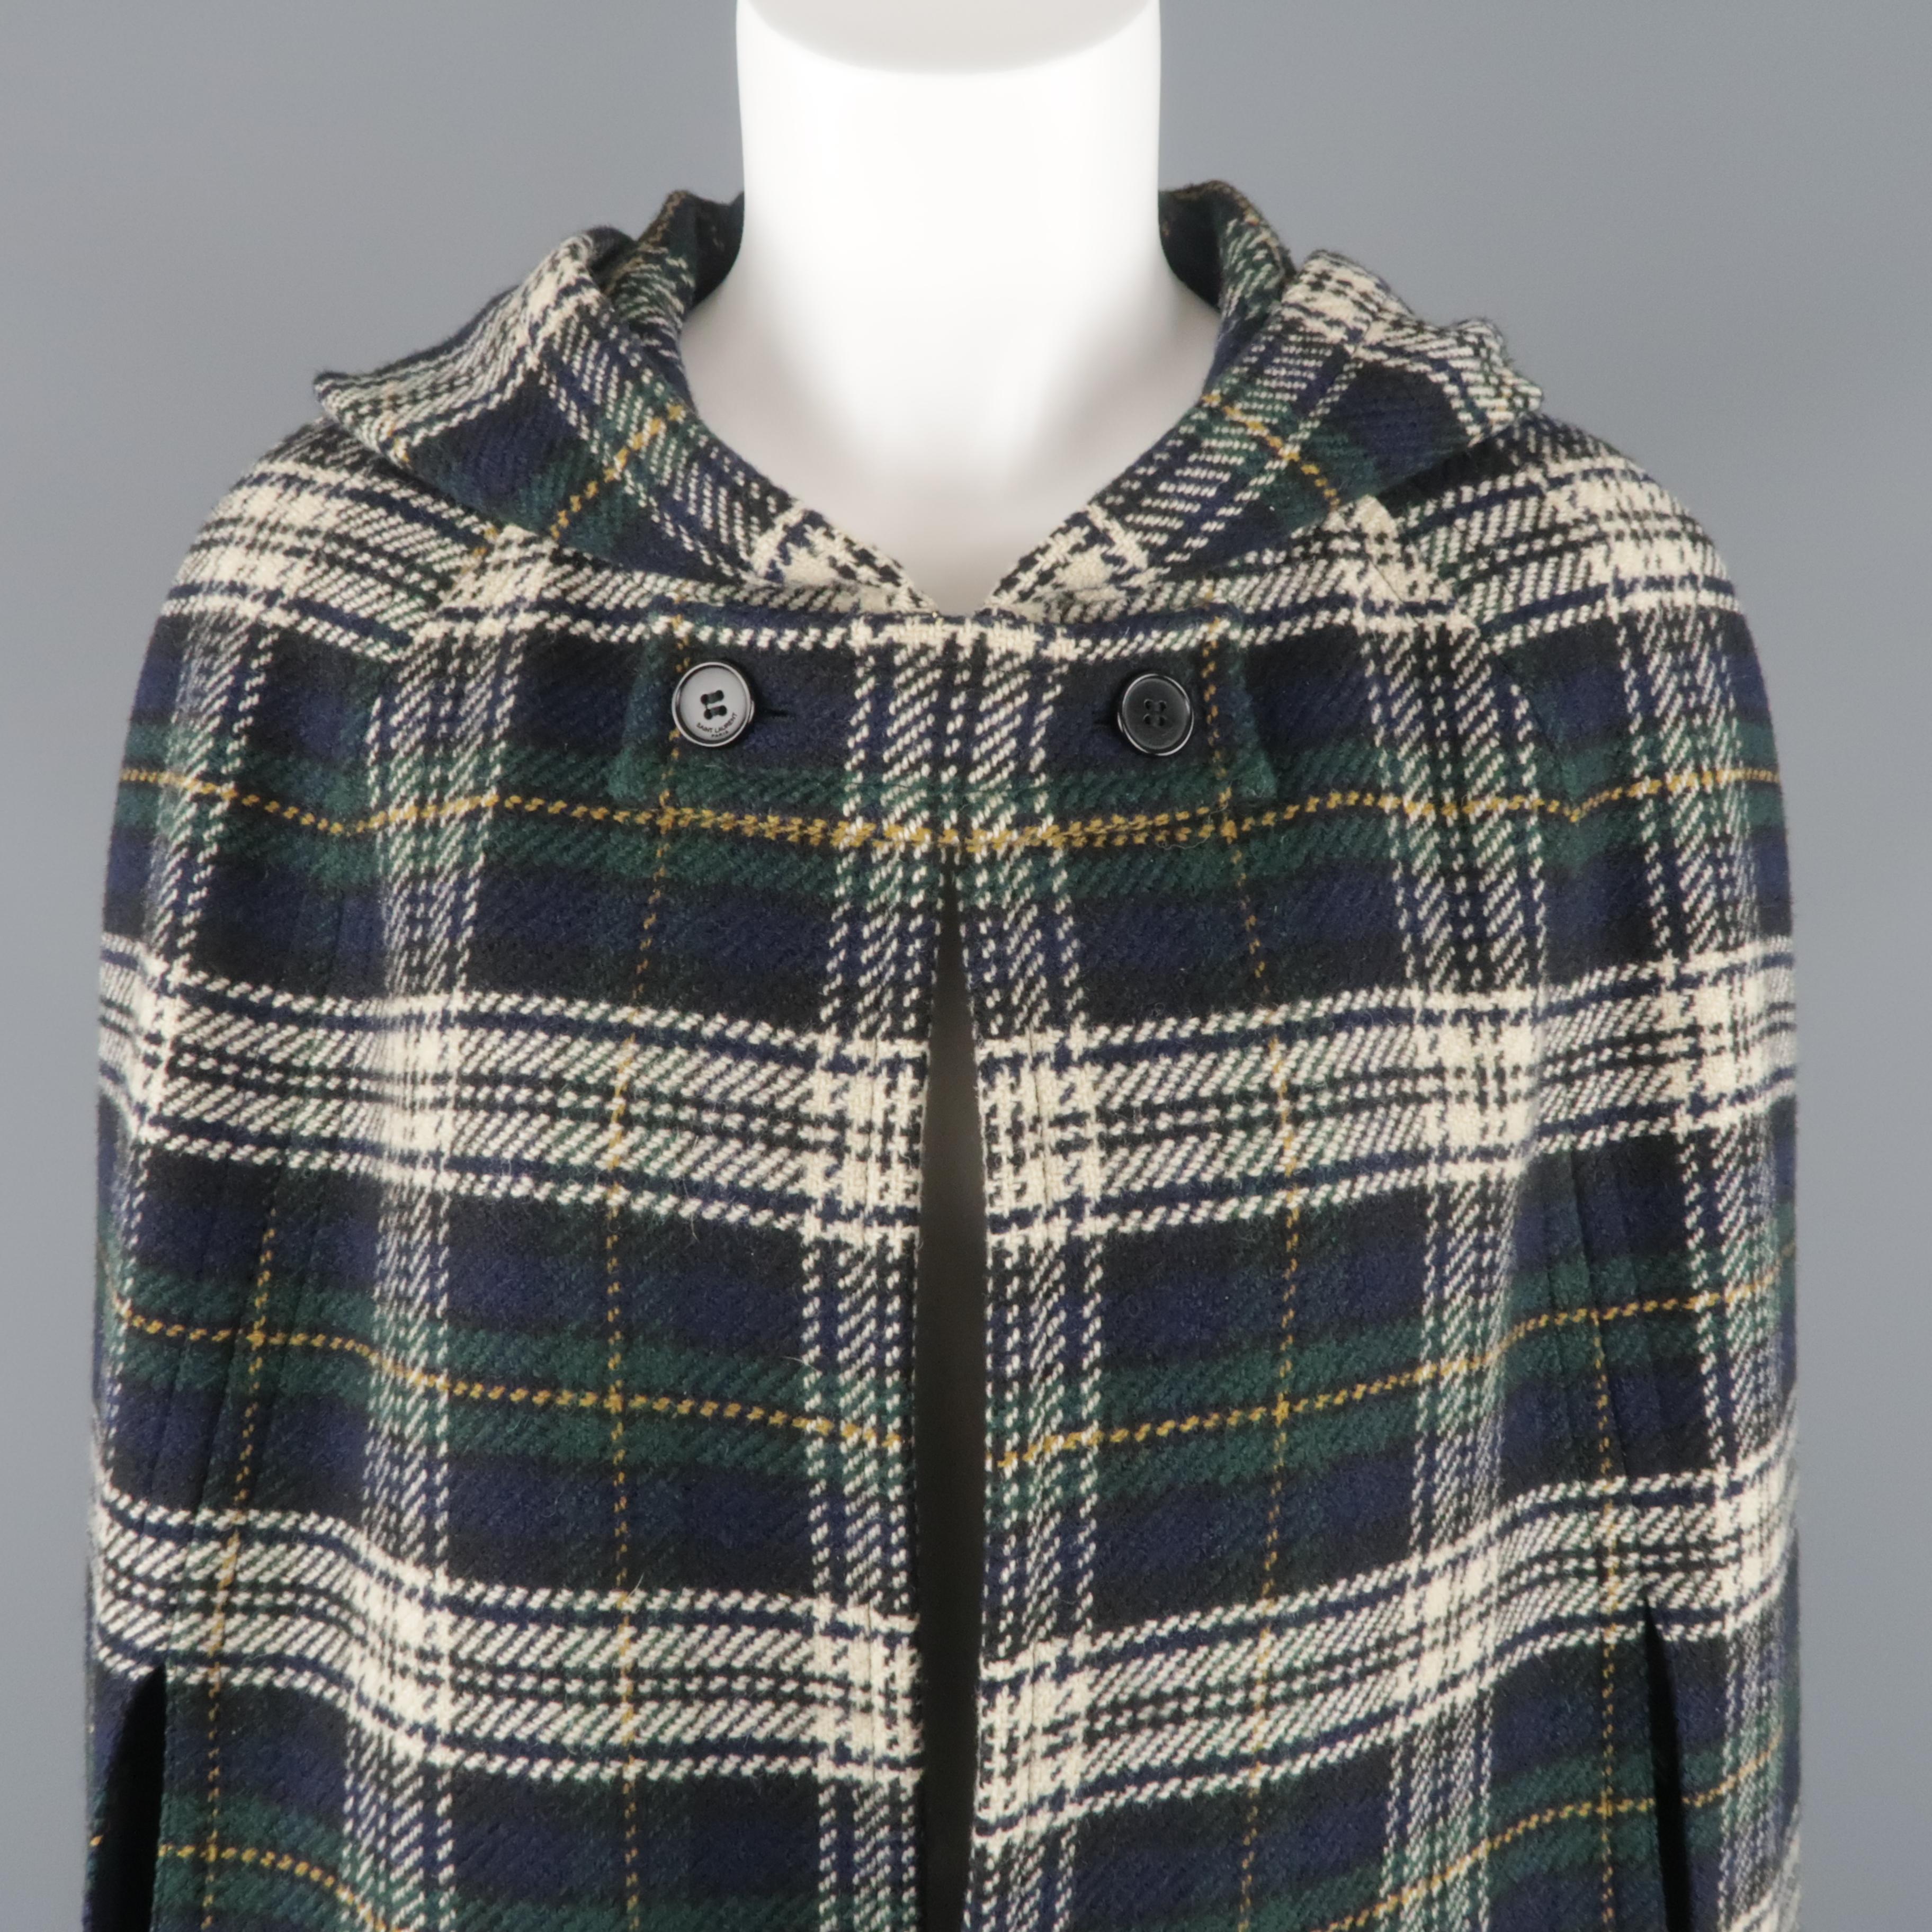 SAINT LAURENT cape comes in navy and green wool plaid with cream and gold accents with a tab closure at neckline, arm slits, and hood. Made in Italy.
 
Excellent Pre-Owned Condition.
Marked: FR 40
 
Measurements:
 
Shoulder: 19 in.
Bust: 58